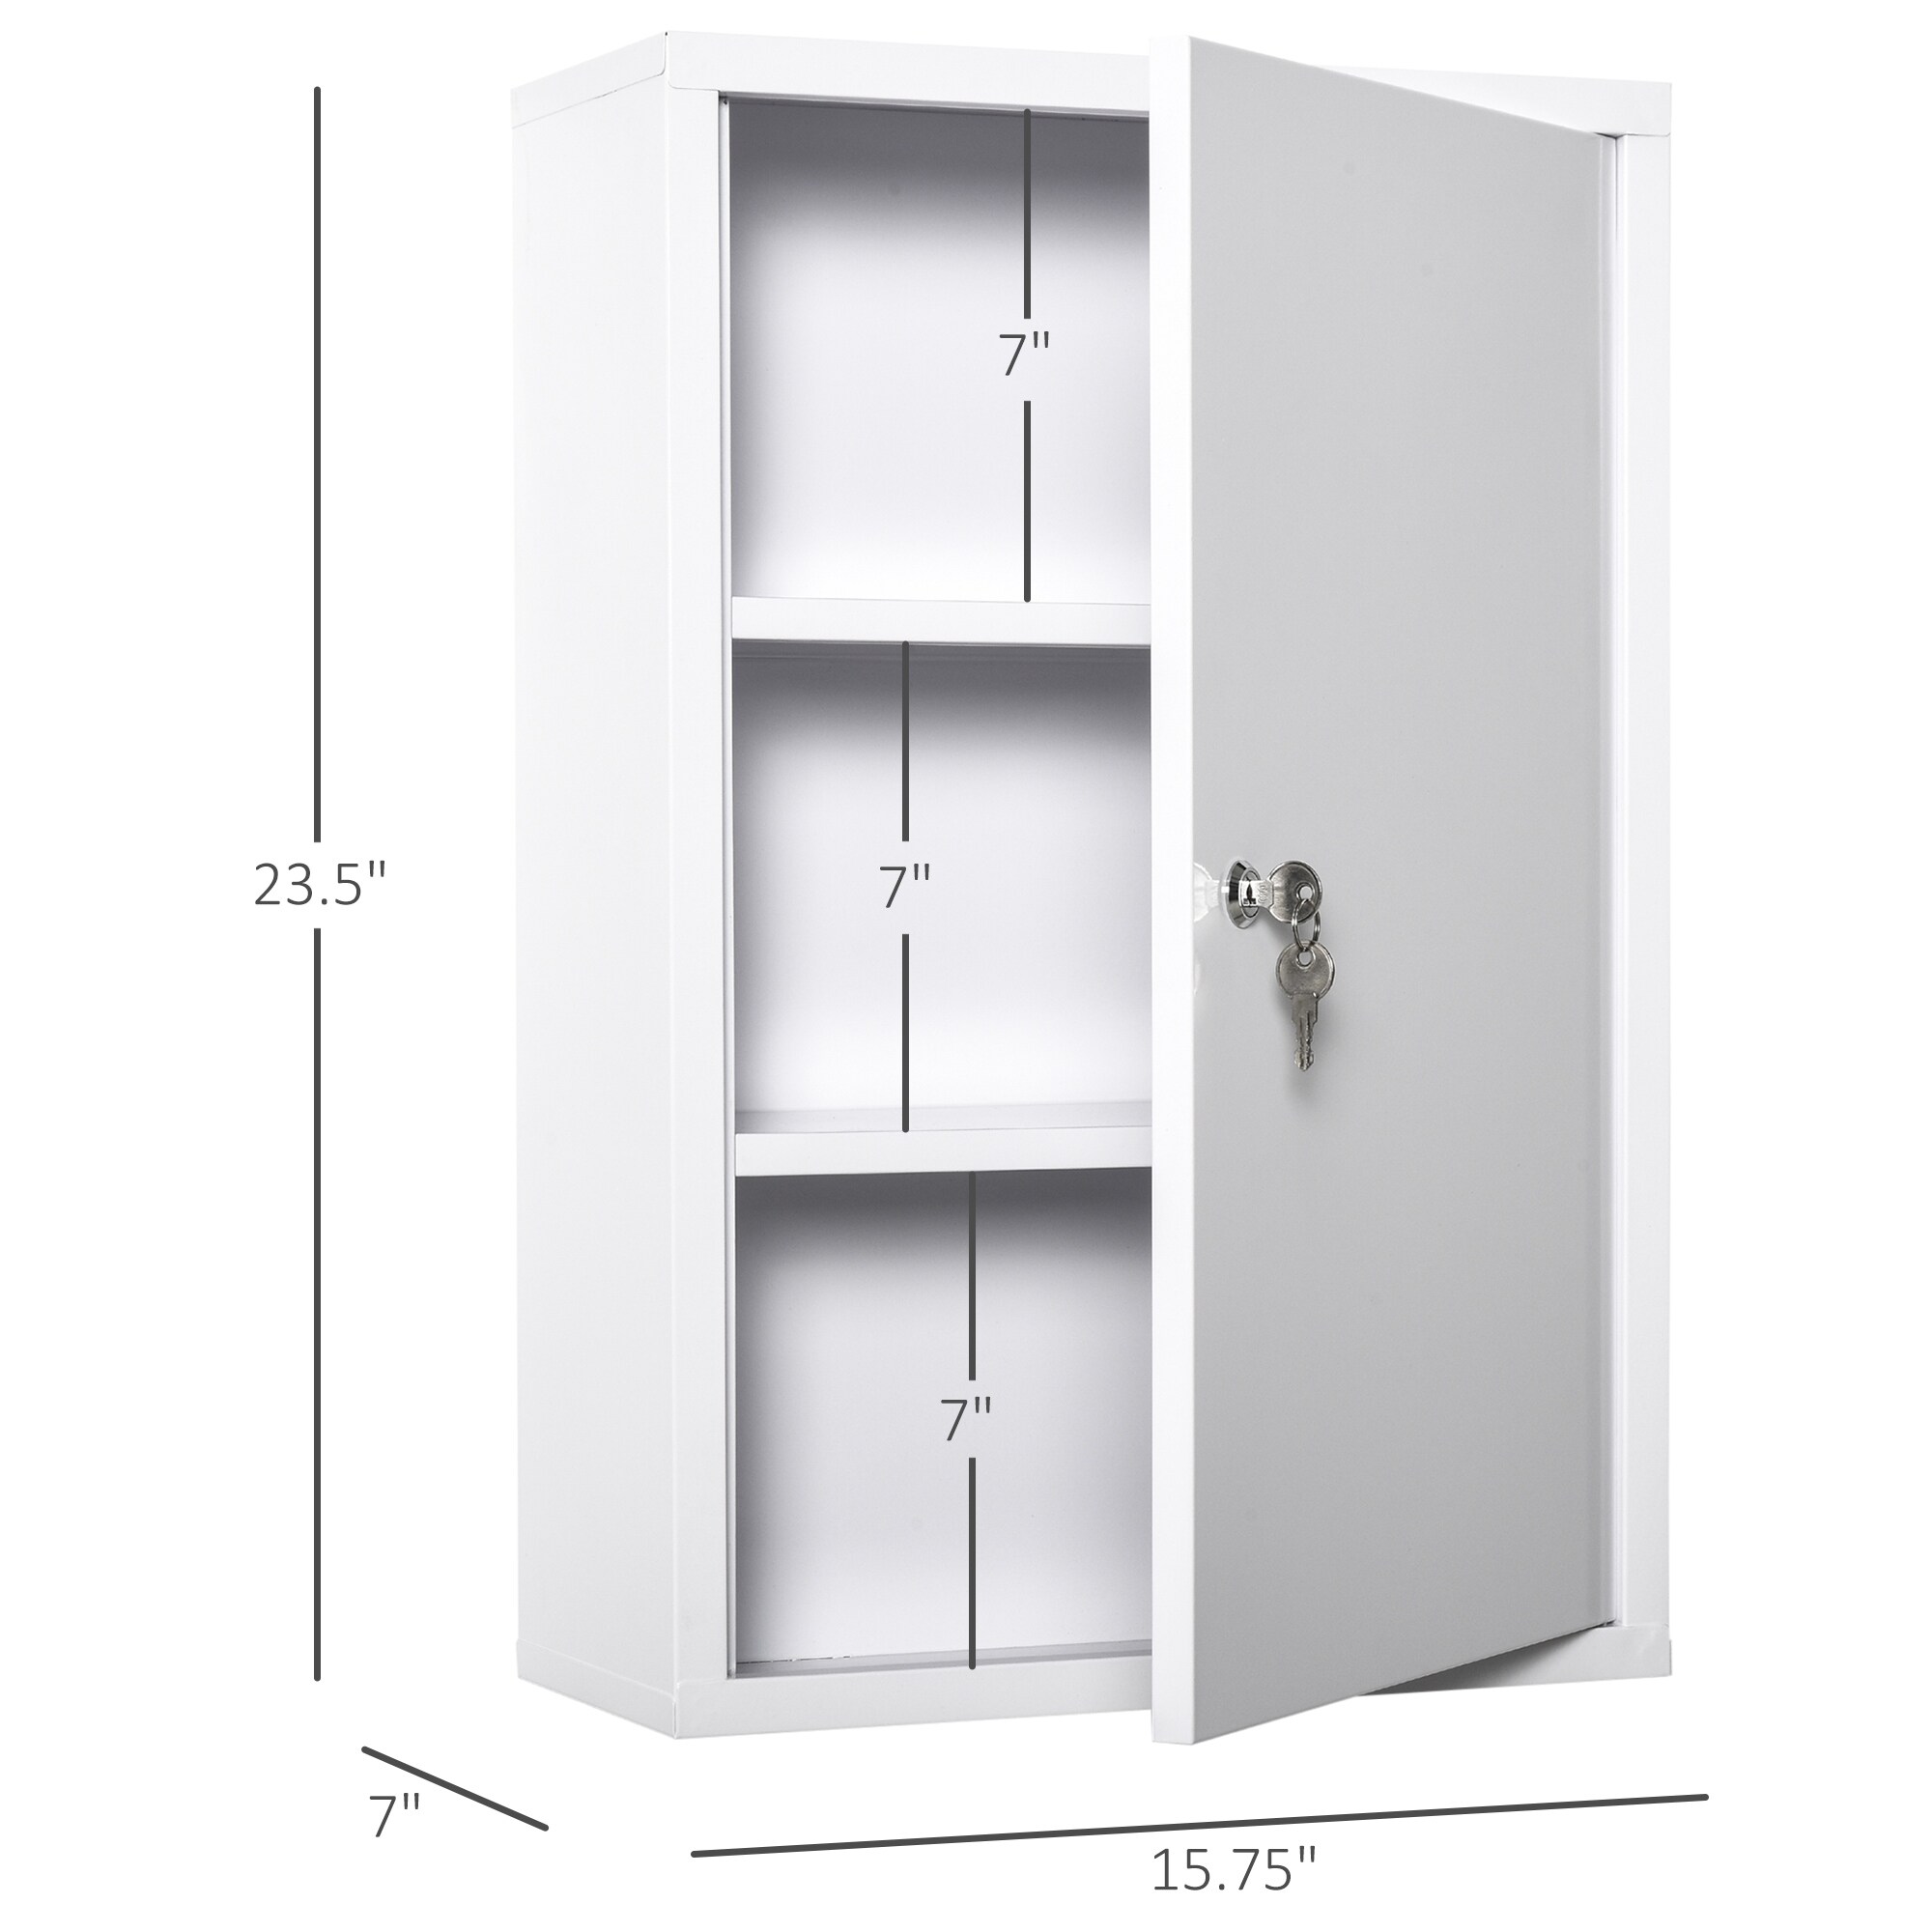 https://ak1.ostkcdn.com/images/products/is/images/direct/5293eac9bd0fc3edc014f7373696b4b8352a2ee6/kleankin-Steel-Wall-Mount-Medicine-Cabinet-3-Tier-Emergency-Box-for-Bathroom-Kitchen%2C-Lockable-with-2-Keys%2C-White.jpg